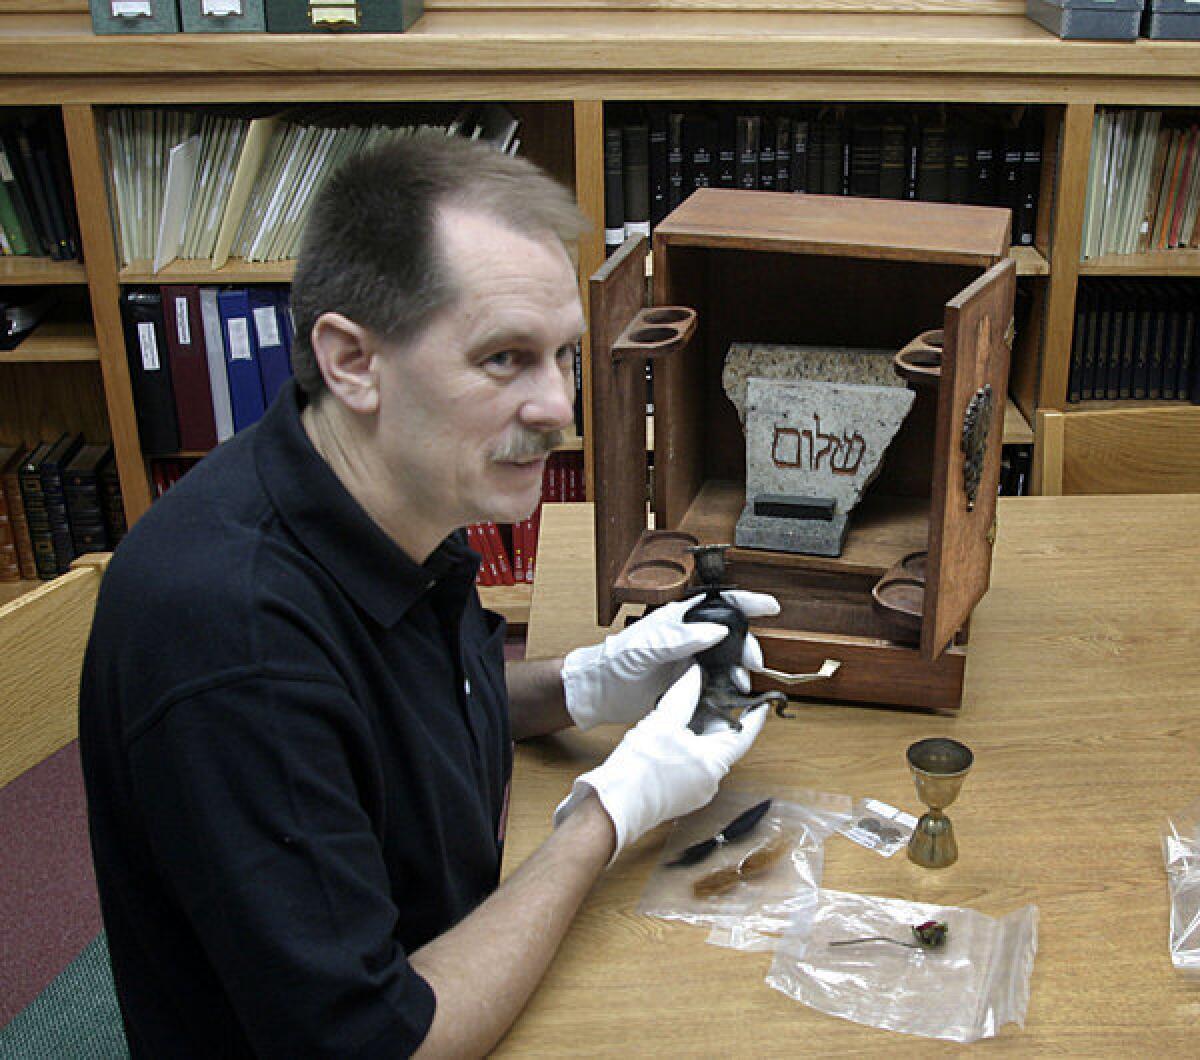 Jason Haxton shows the contents of the box with the long mysterious history.